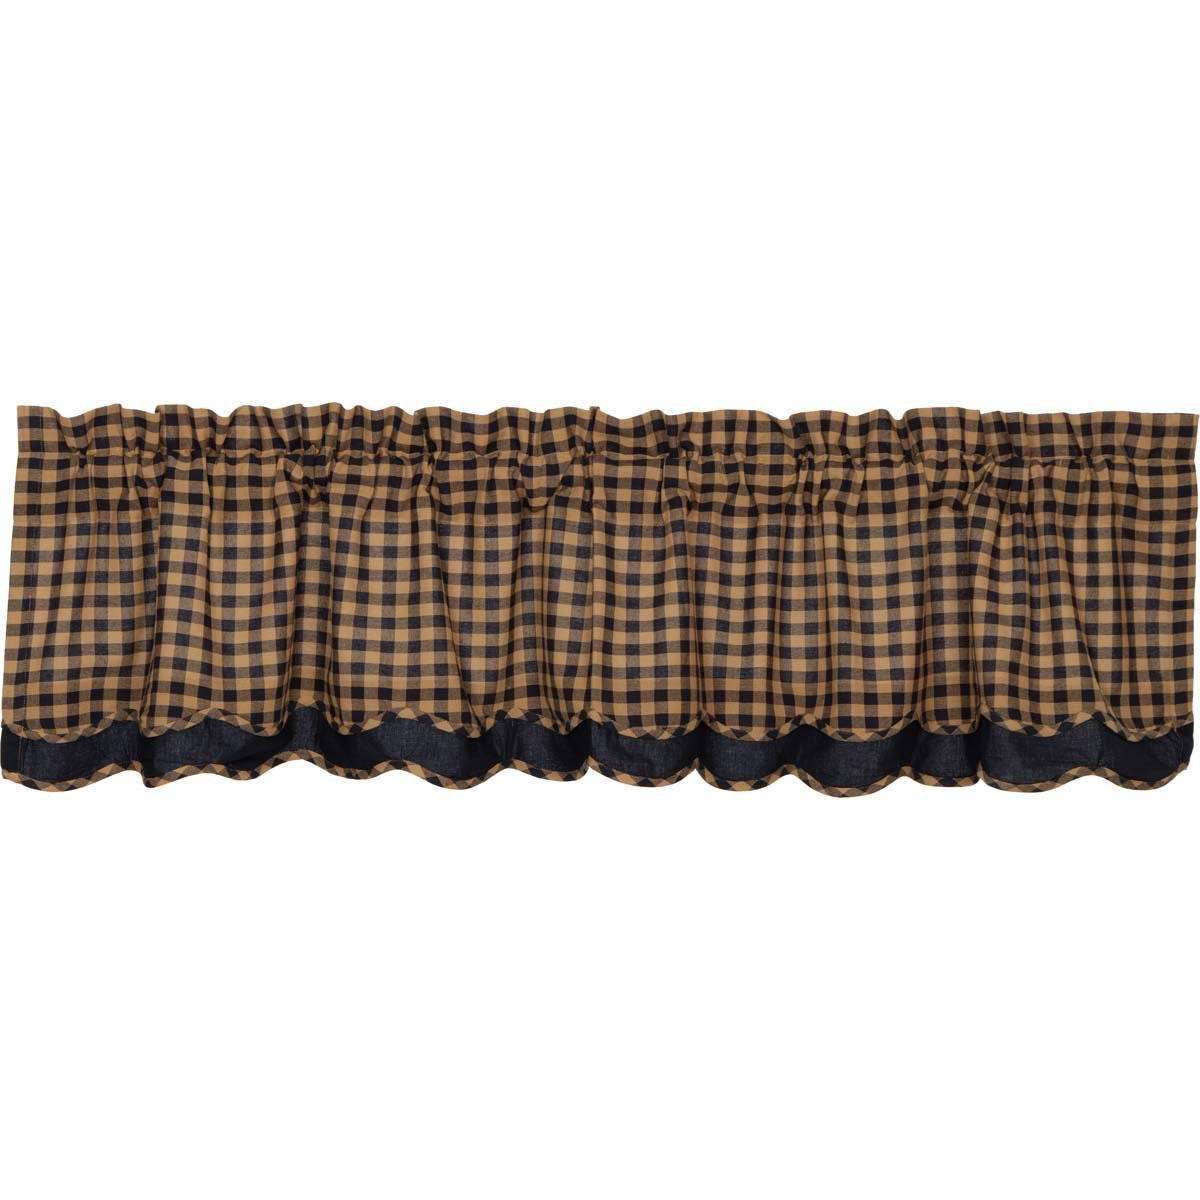 Navy Check Scalloped Layered Valance Curtain 16" x 72" VHC Brands - The Fox Decor